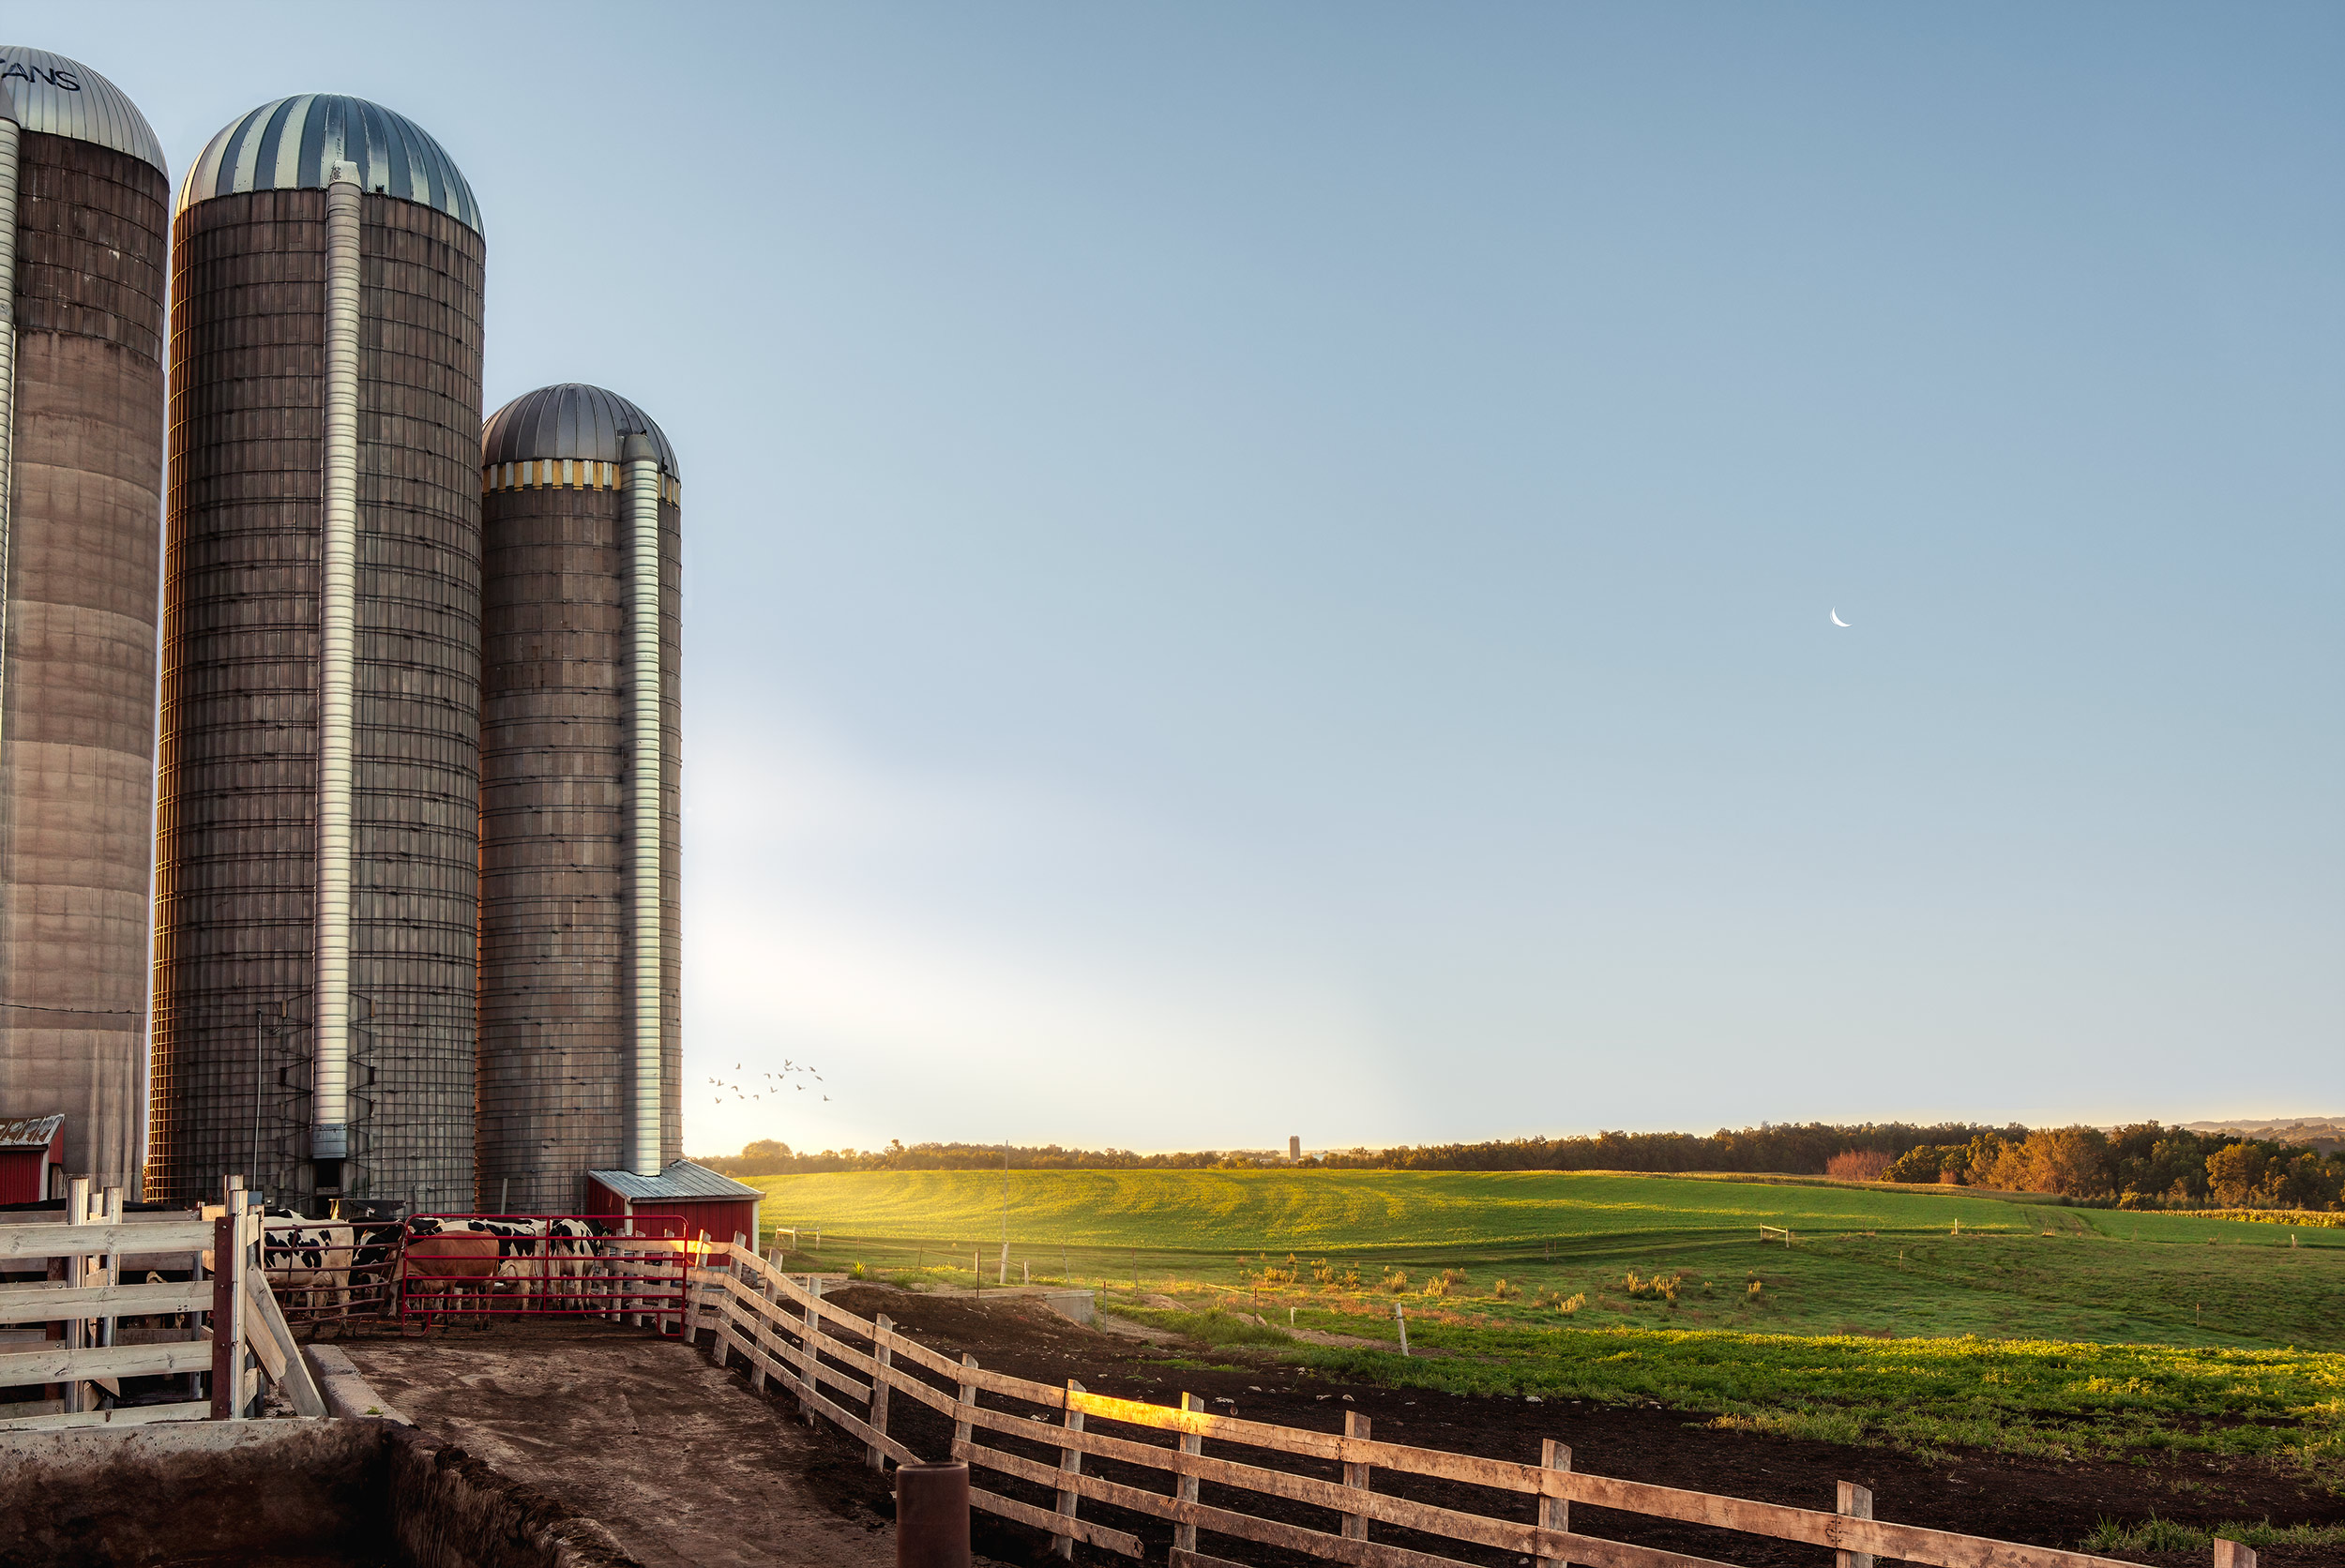 Agriculture Photography live stock dairy cows and silos at sunrise